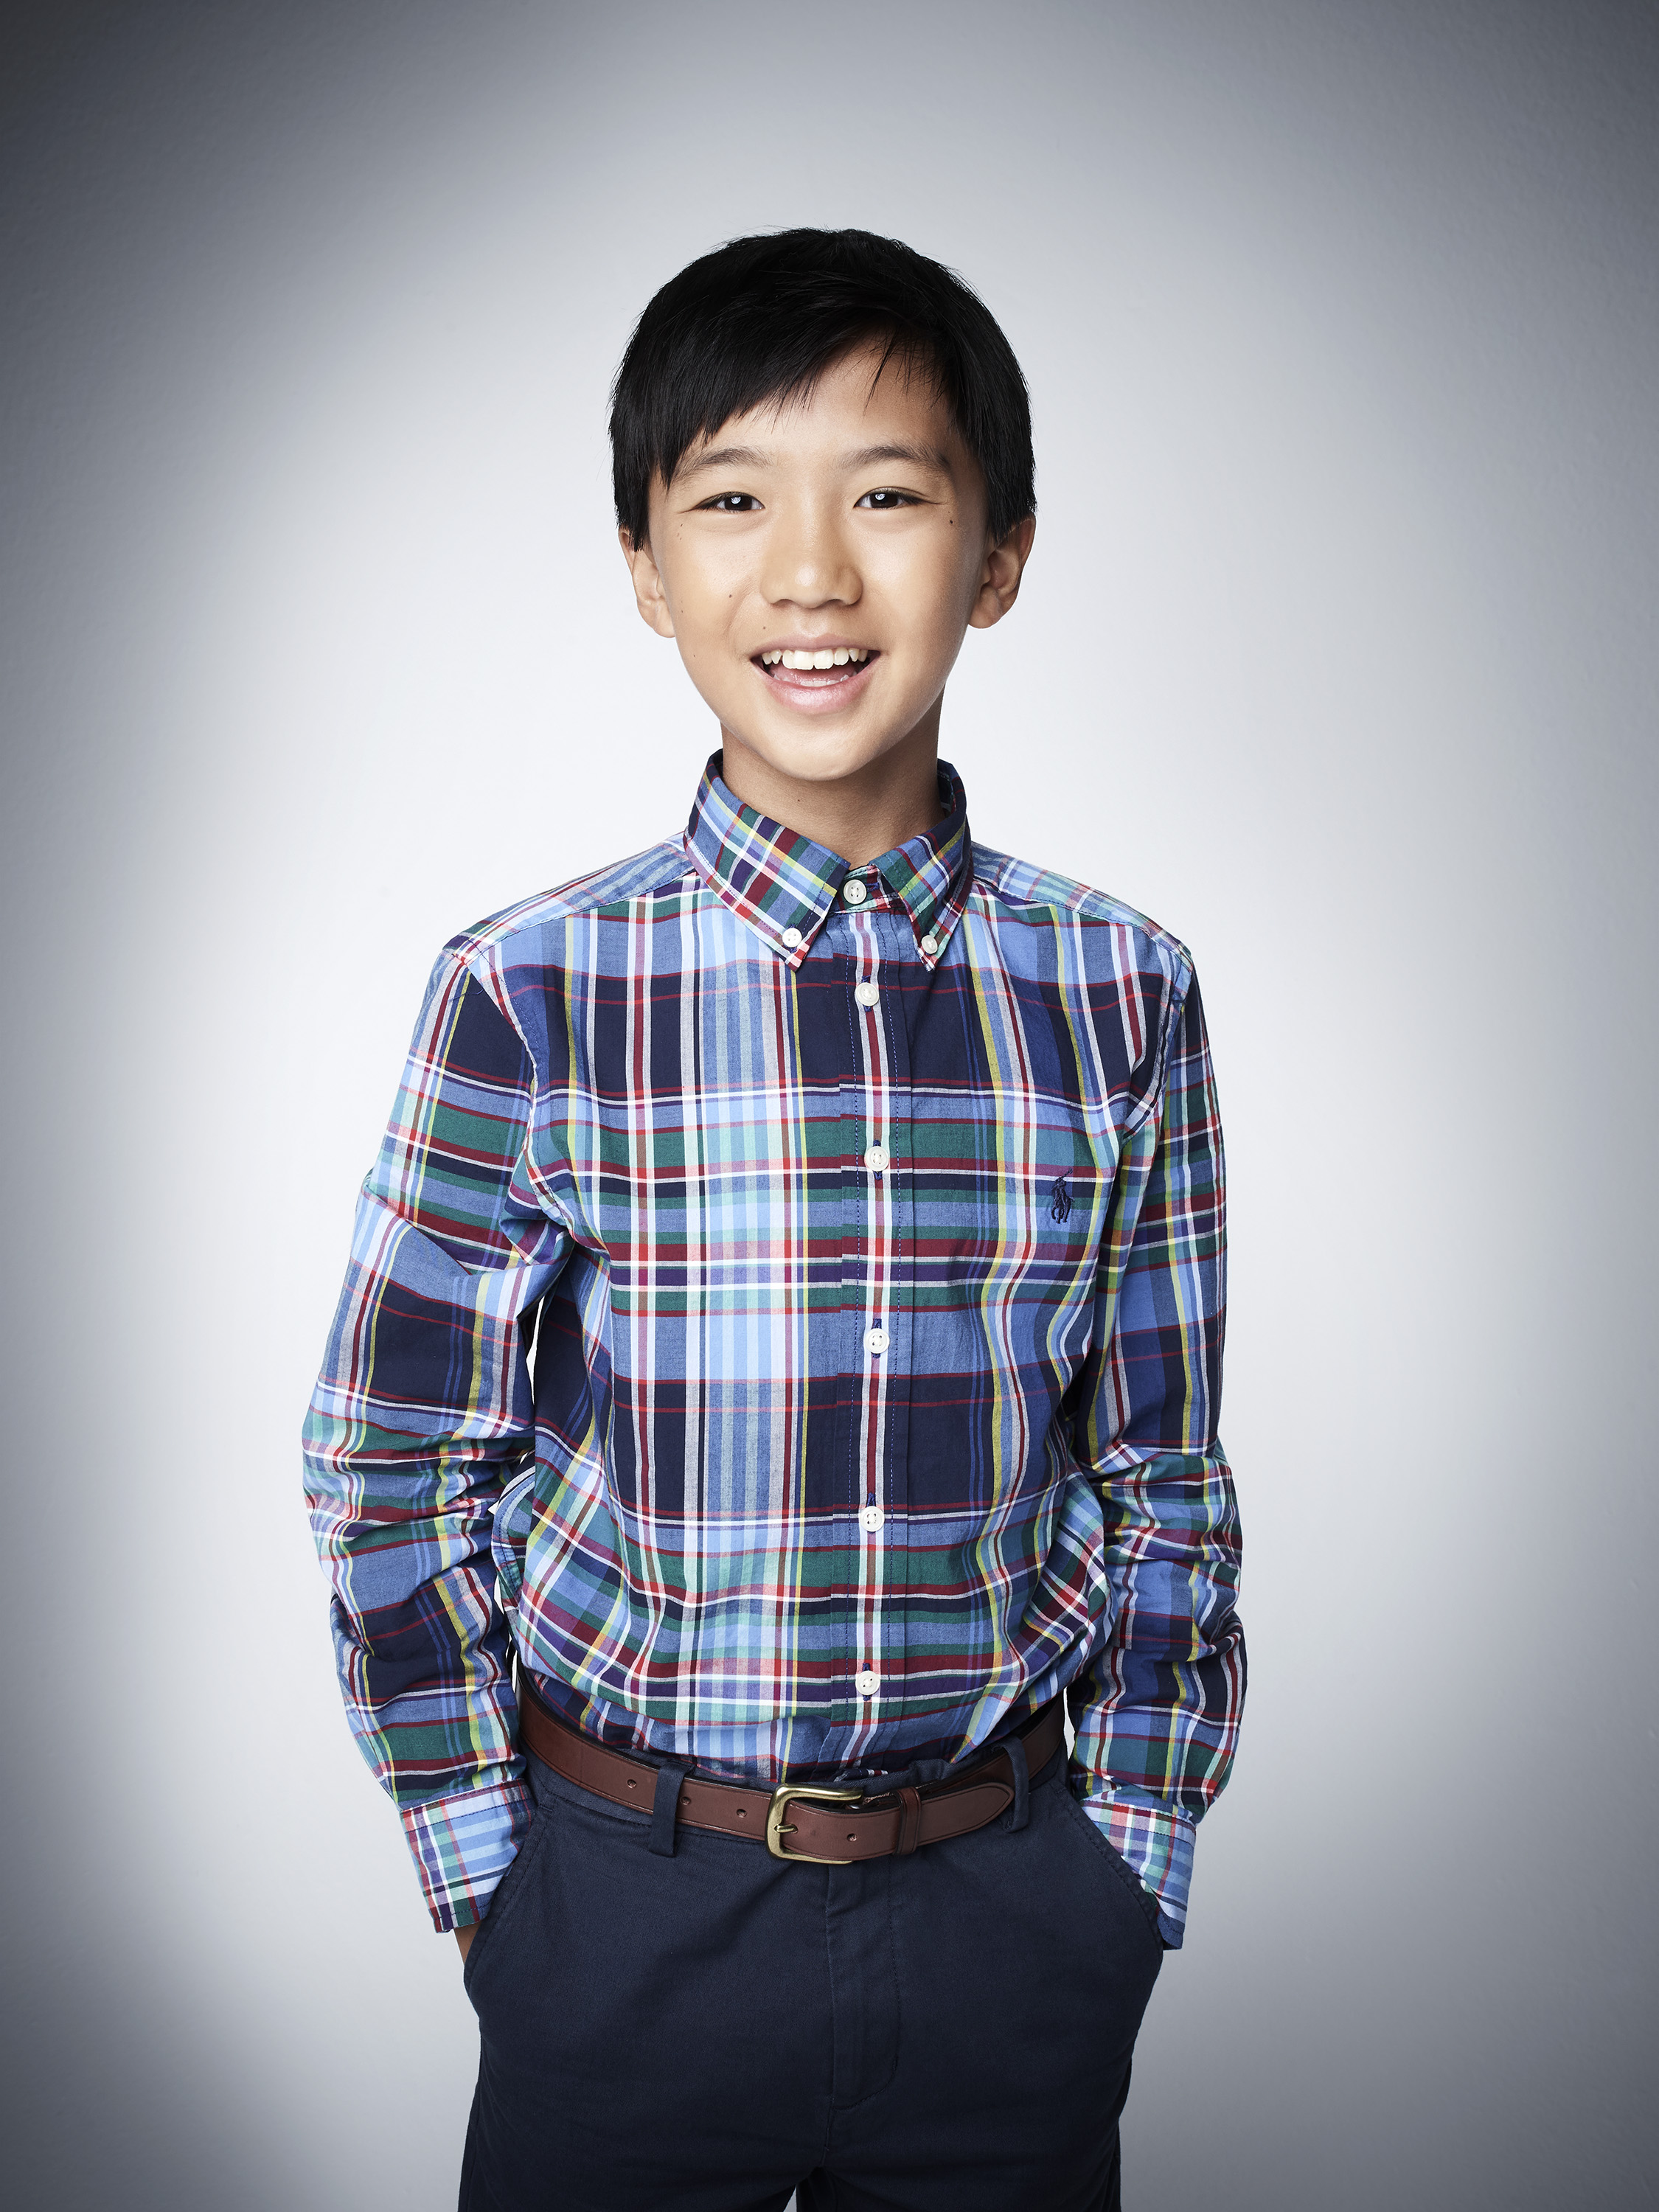 Fresh Off the Boat' to end after six seasons